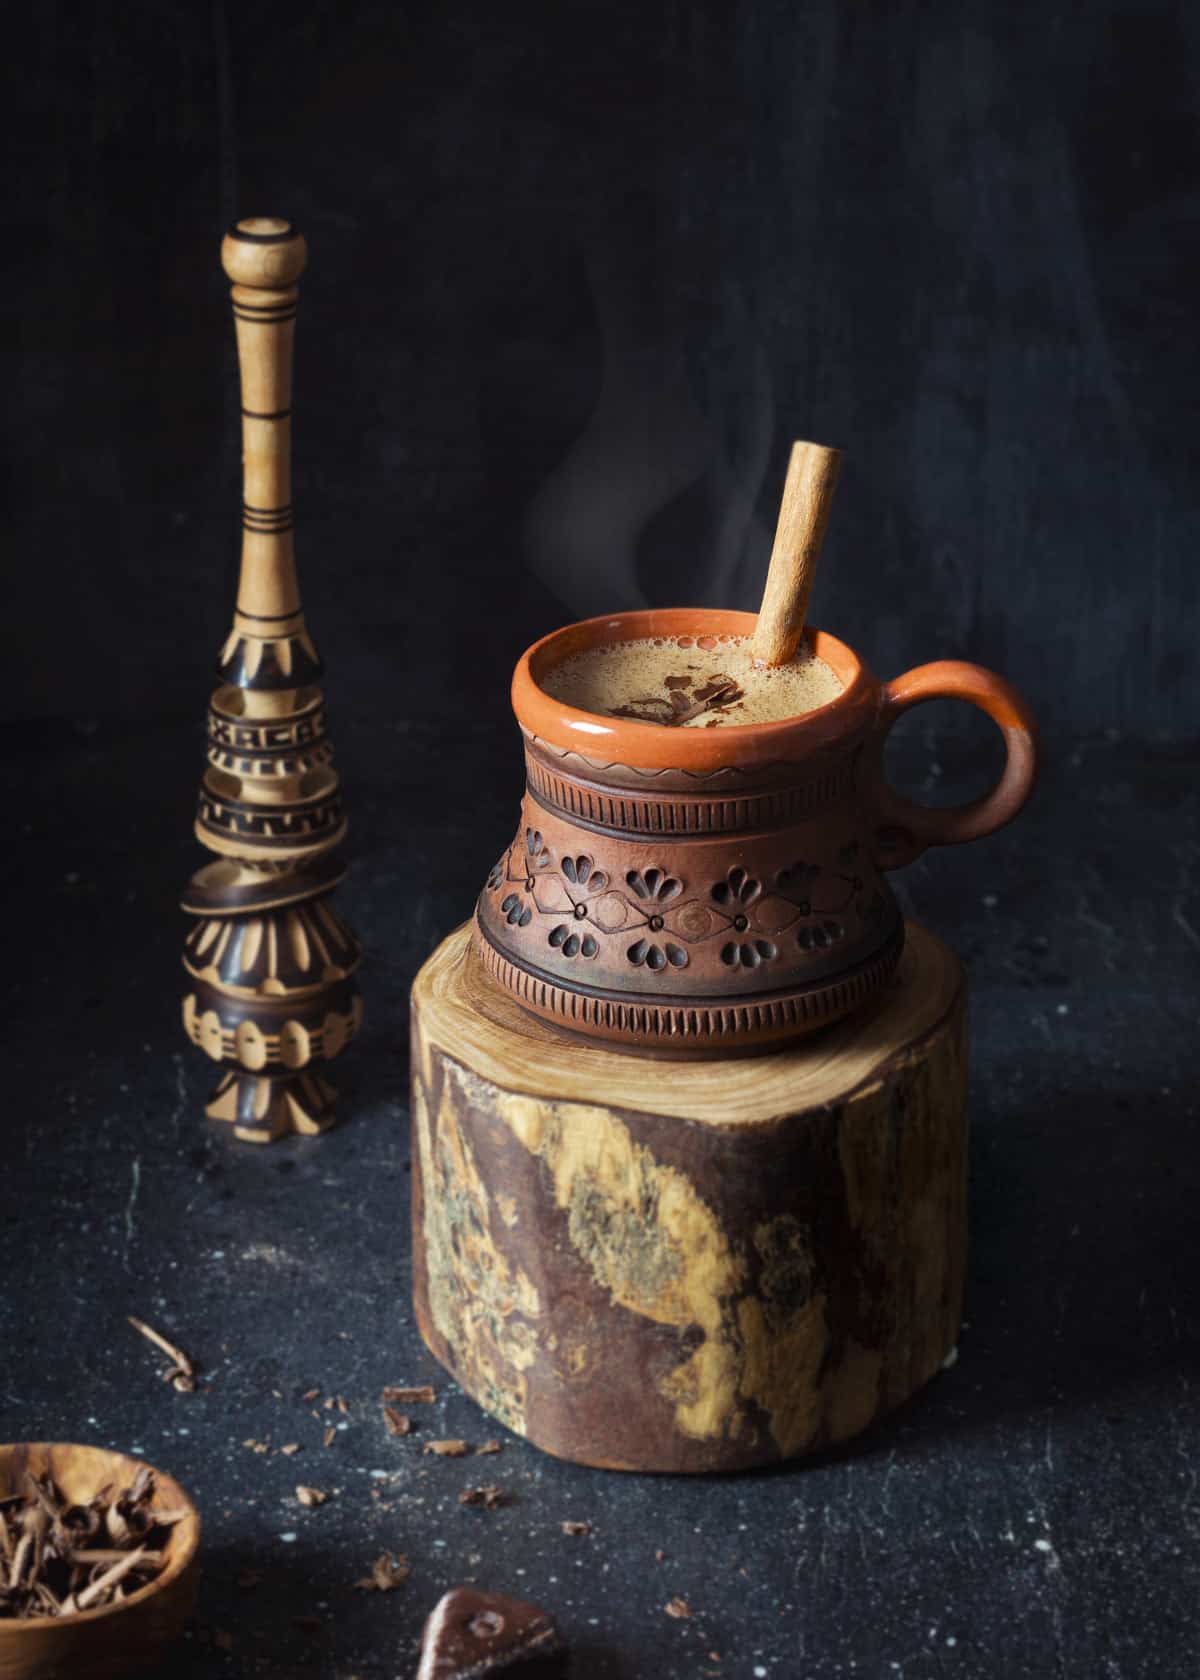 Hot chocolate - Oaxacan style in a clay mug with Molinillo, a traditional Mexican wooden whisk.